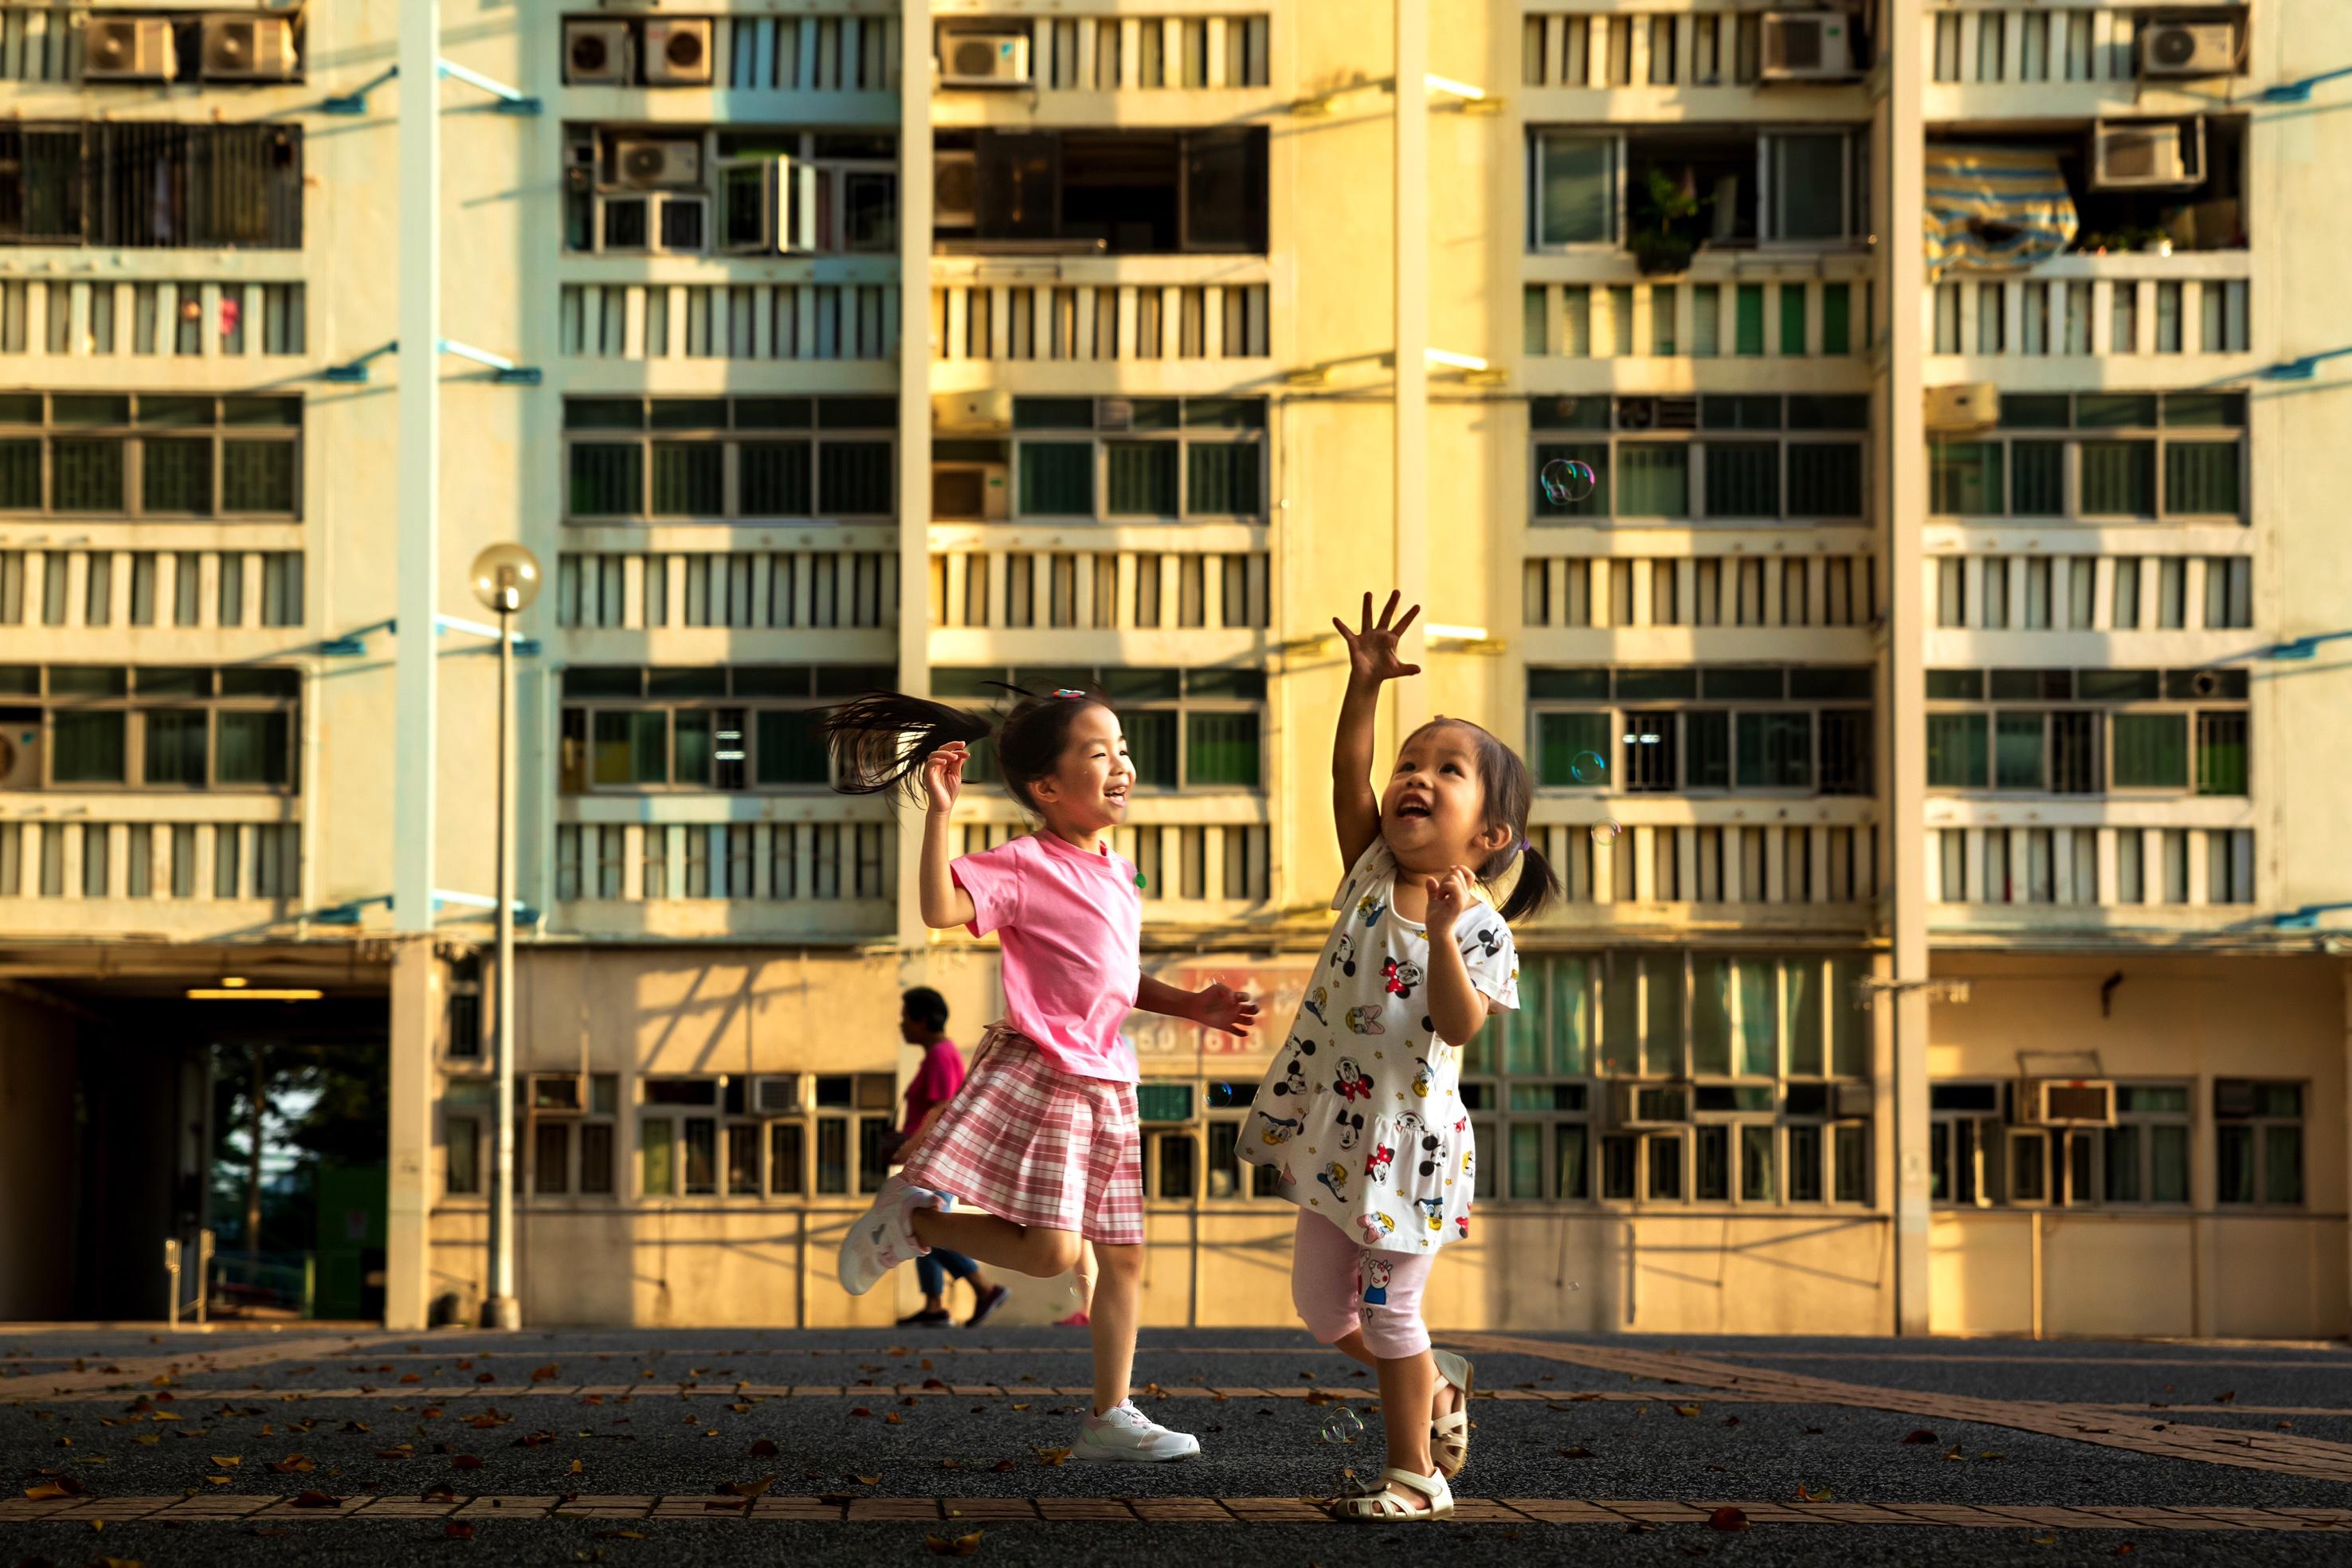 The winning entries of the Hong Kong Housing Authority's 50th Anniversary Photo Contest are on display at the atrium of Domain shopping mall in Yau Tong from today (December 14) until January 19, 2024. Photo shows the champion photo "Joyful Childhood" of the "Open Group" category.